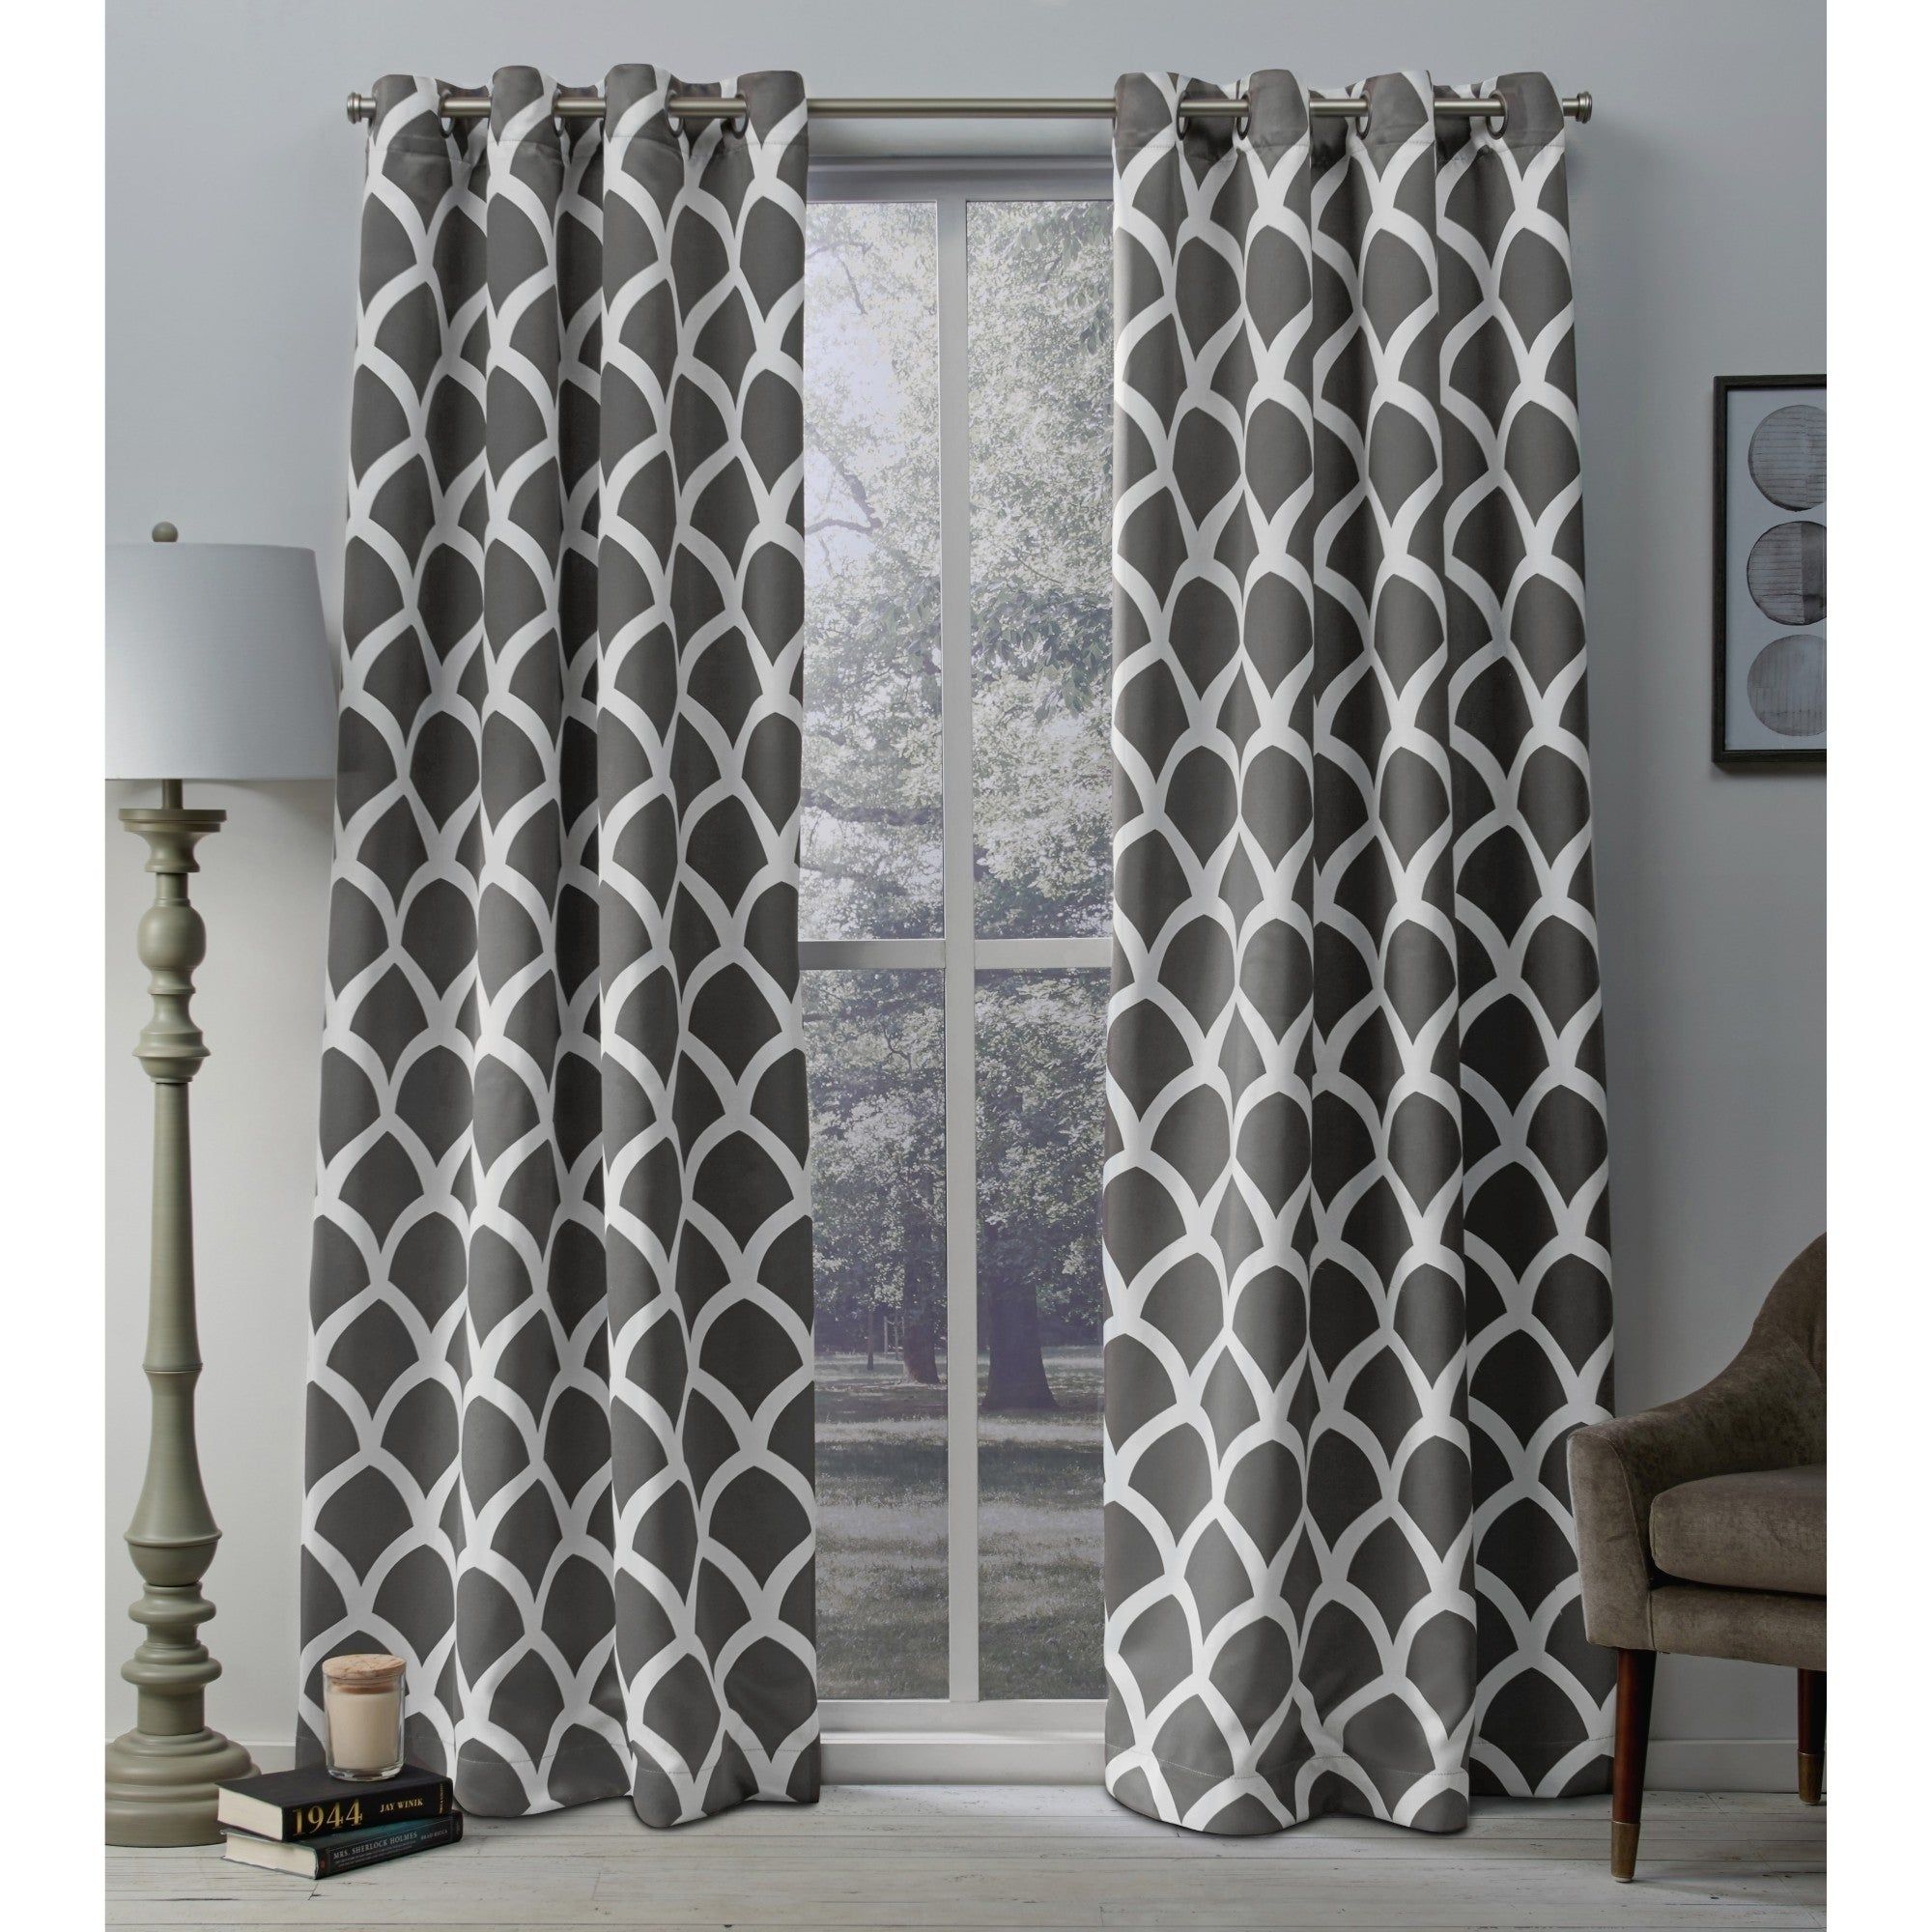 The Curated Nomad Ames Sateen Woven Blackout Grommet Top Curtain Panel Pair Throughout Woven Blackout Grommet Top Curtain Panel Pairs (View 2 of 30)